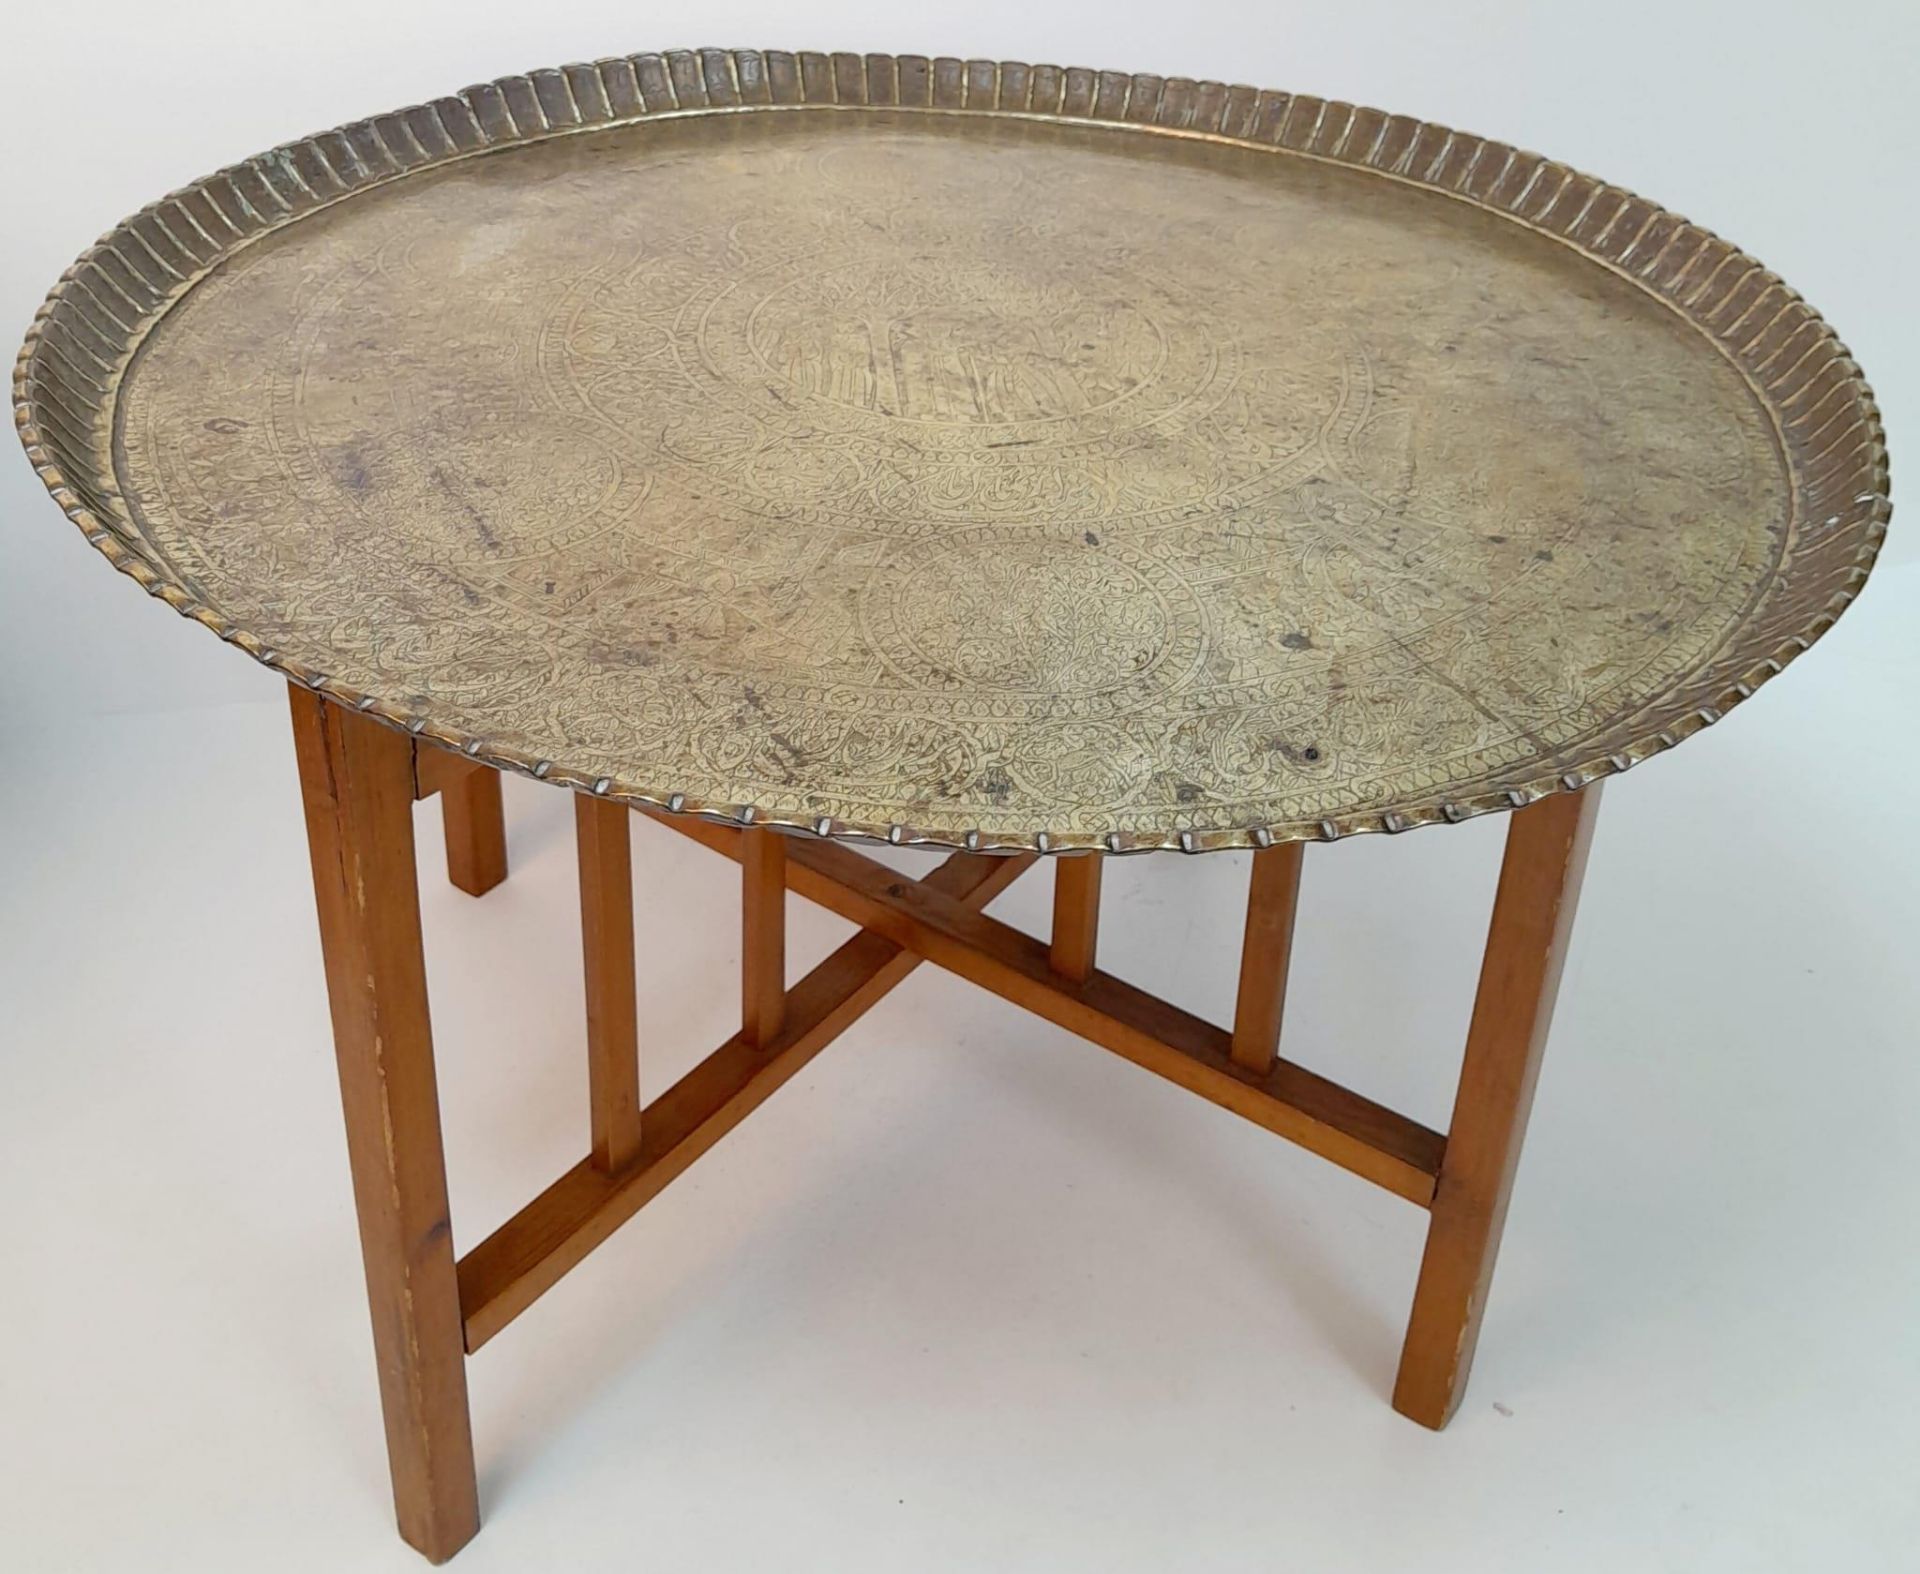 A MIDDLE EASTERN BRASS TOPPED TABLE WITH FOLDING WOODEN LEGS . 52cms TALL 76cms DIAMETER. Collection